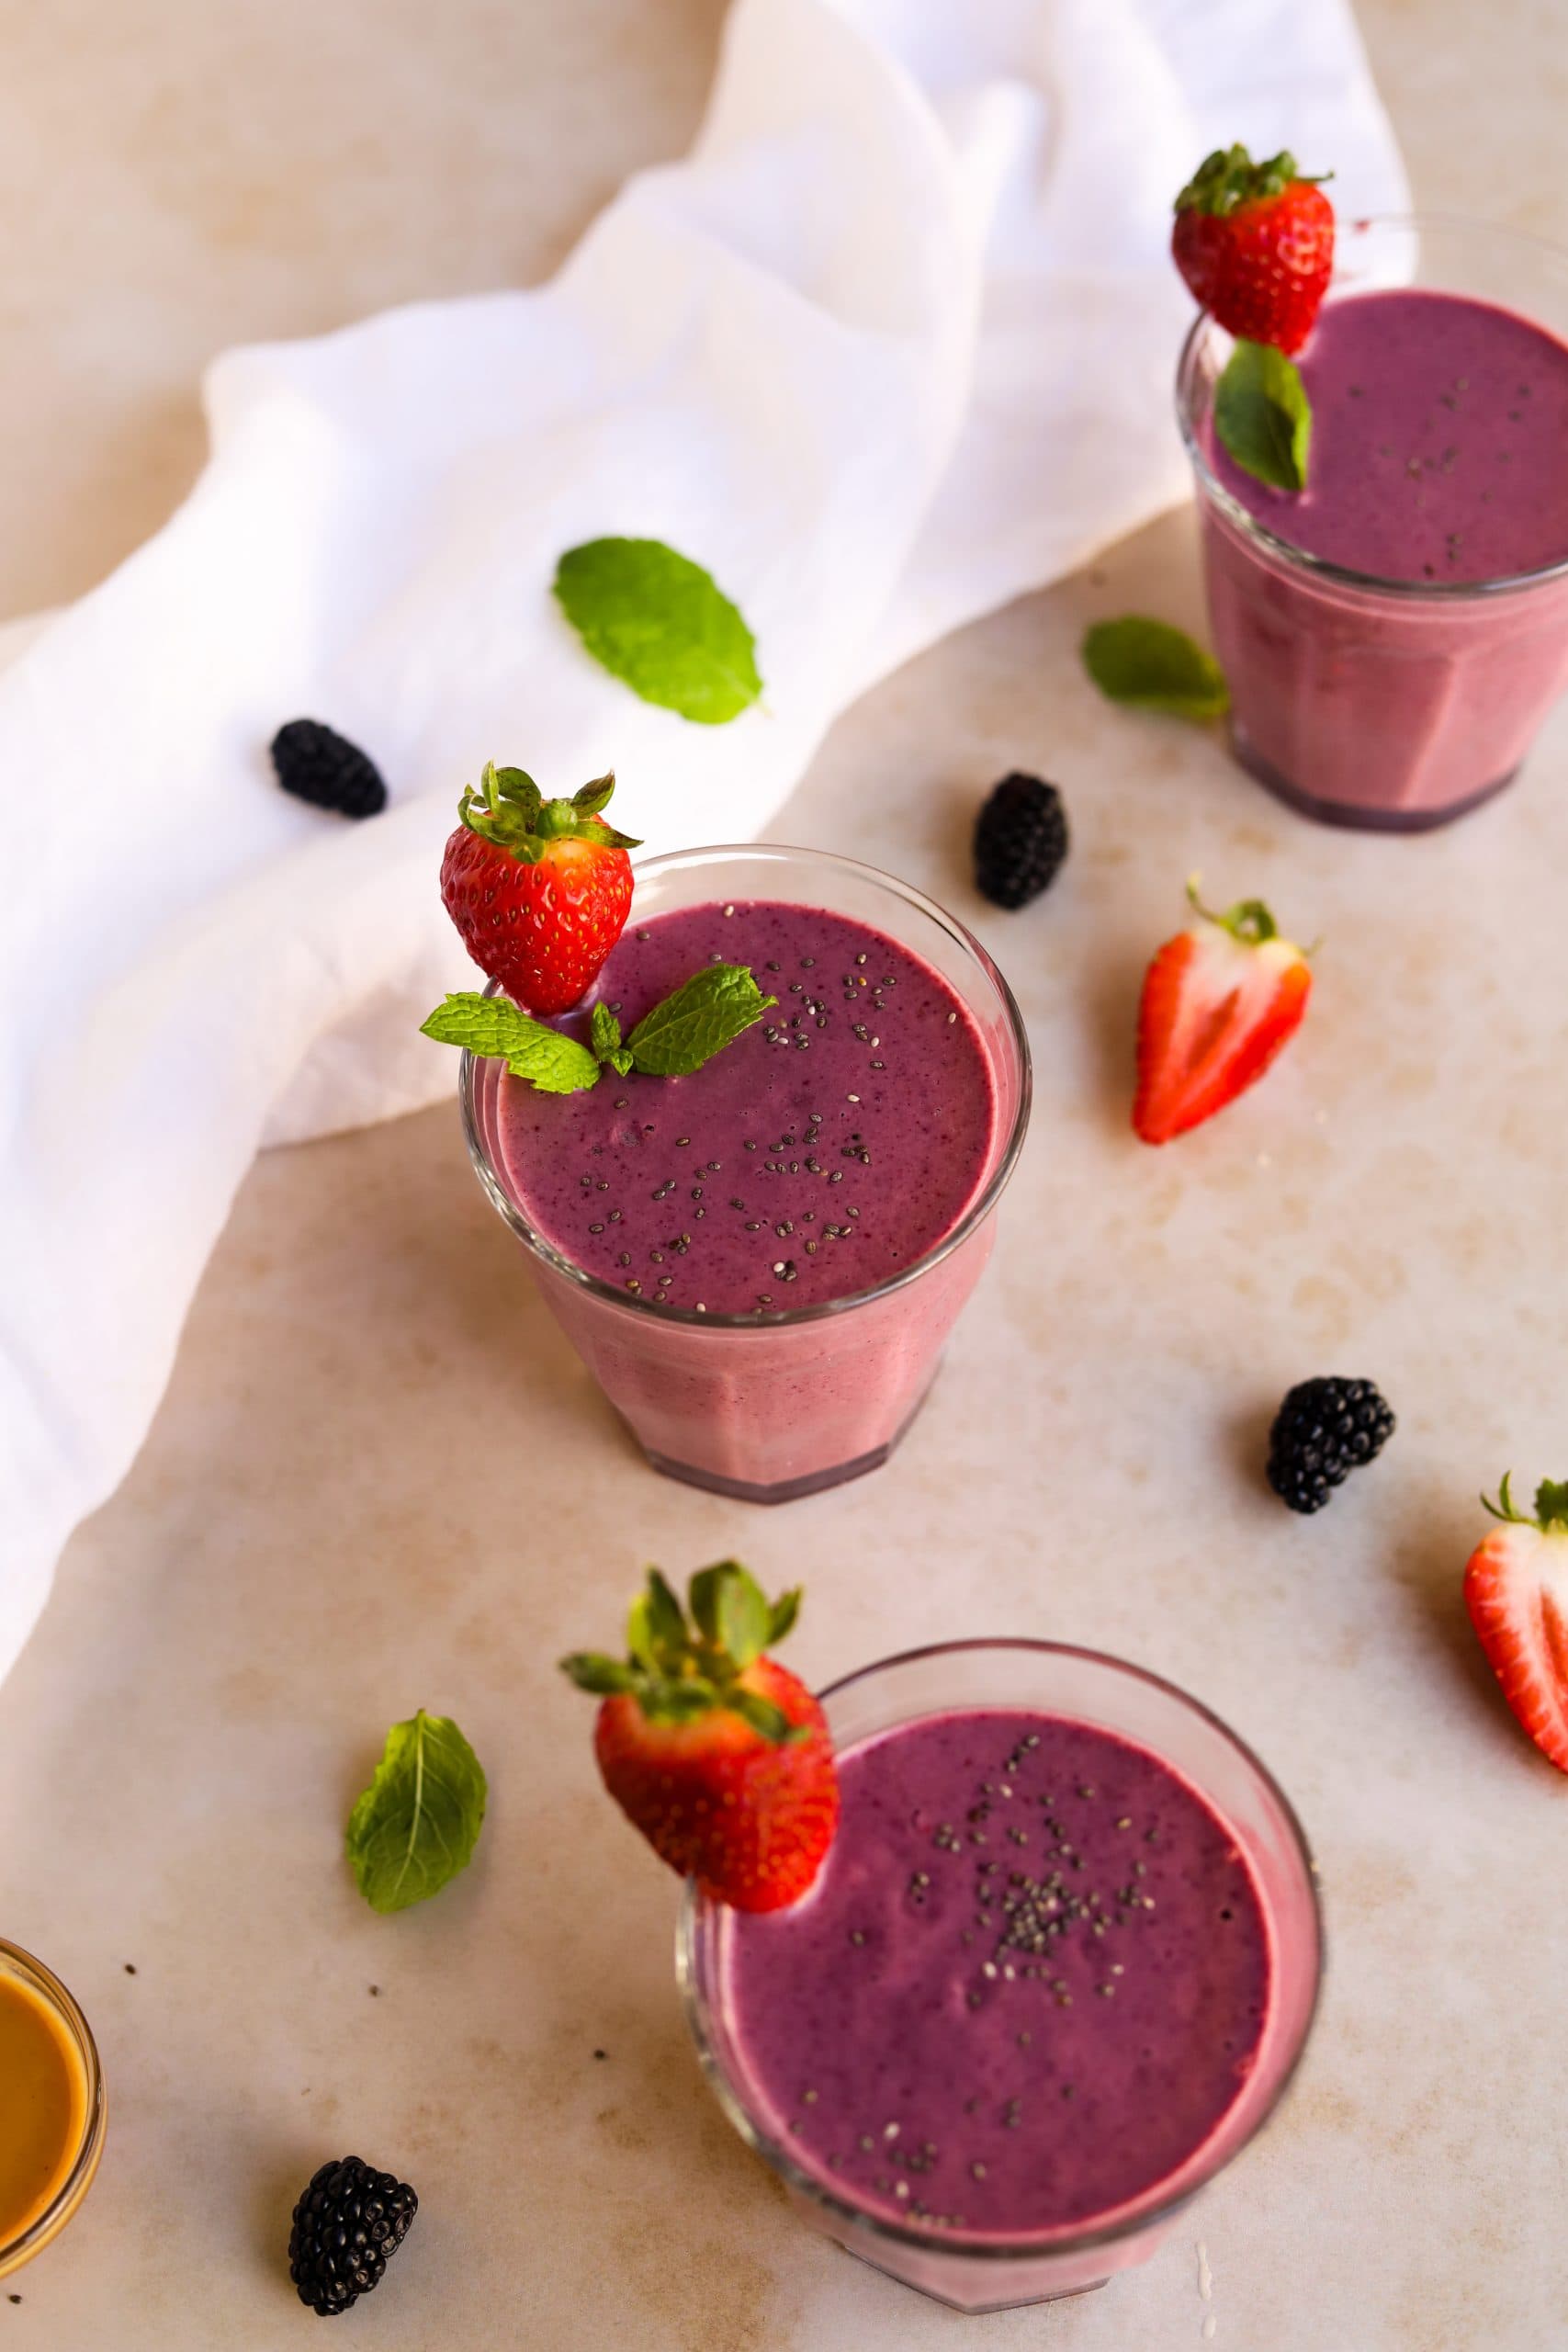 https://theheirloompantry.co/wp-content/uploads/2021/01/Peanut-Butter-and-Berry-Smoothie-The-Heirloom-Pantry-16-scaled.jpg